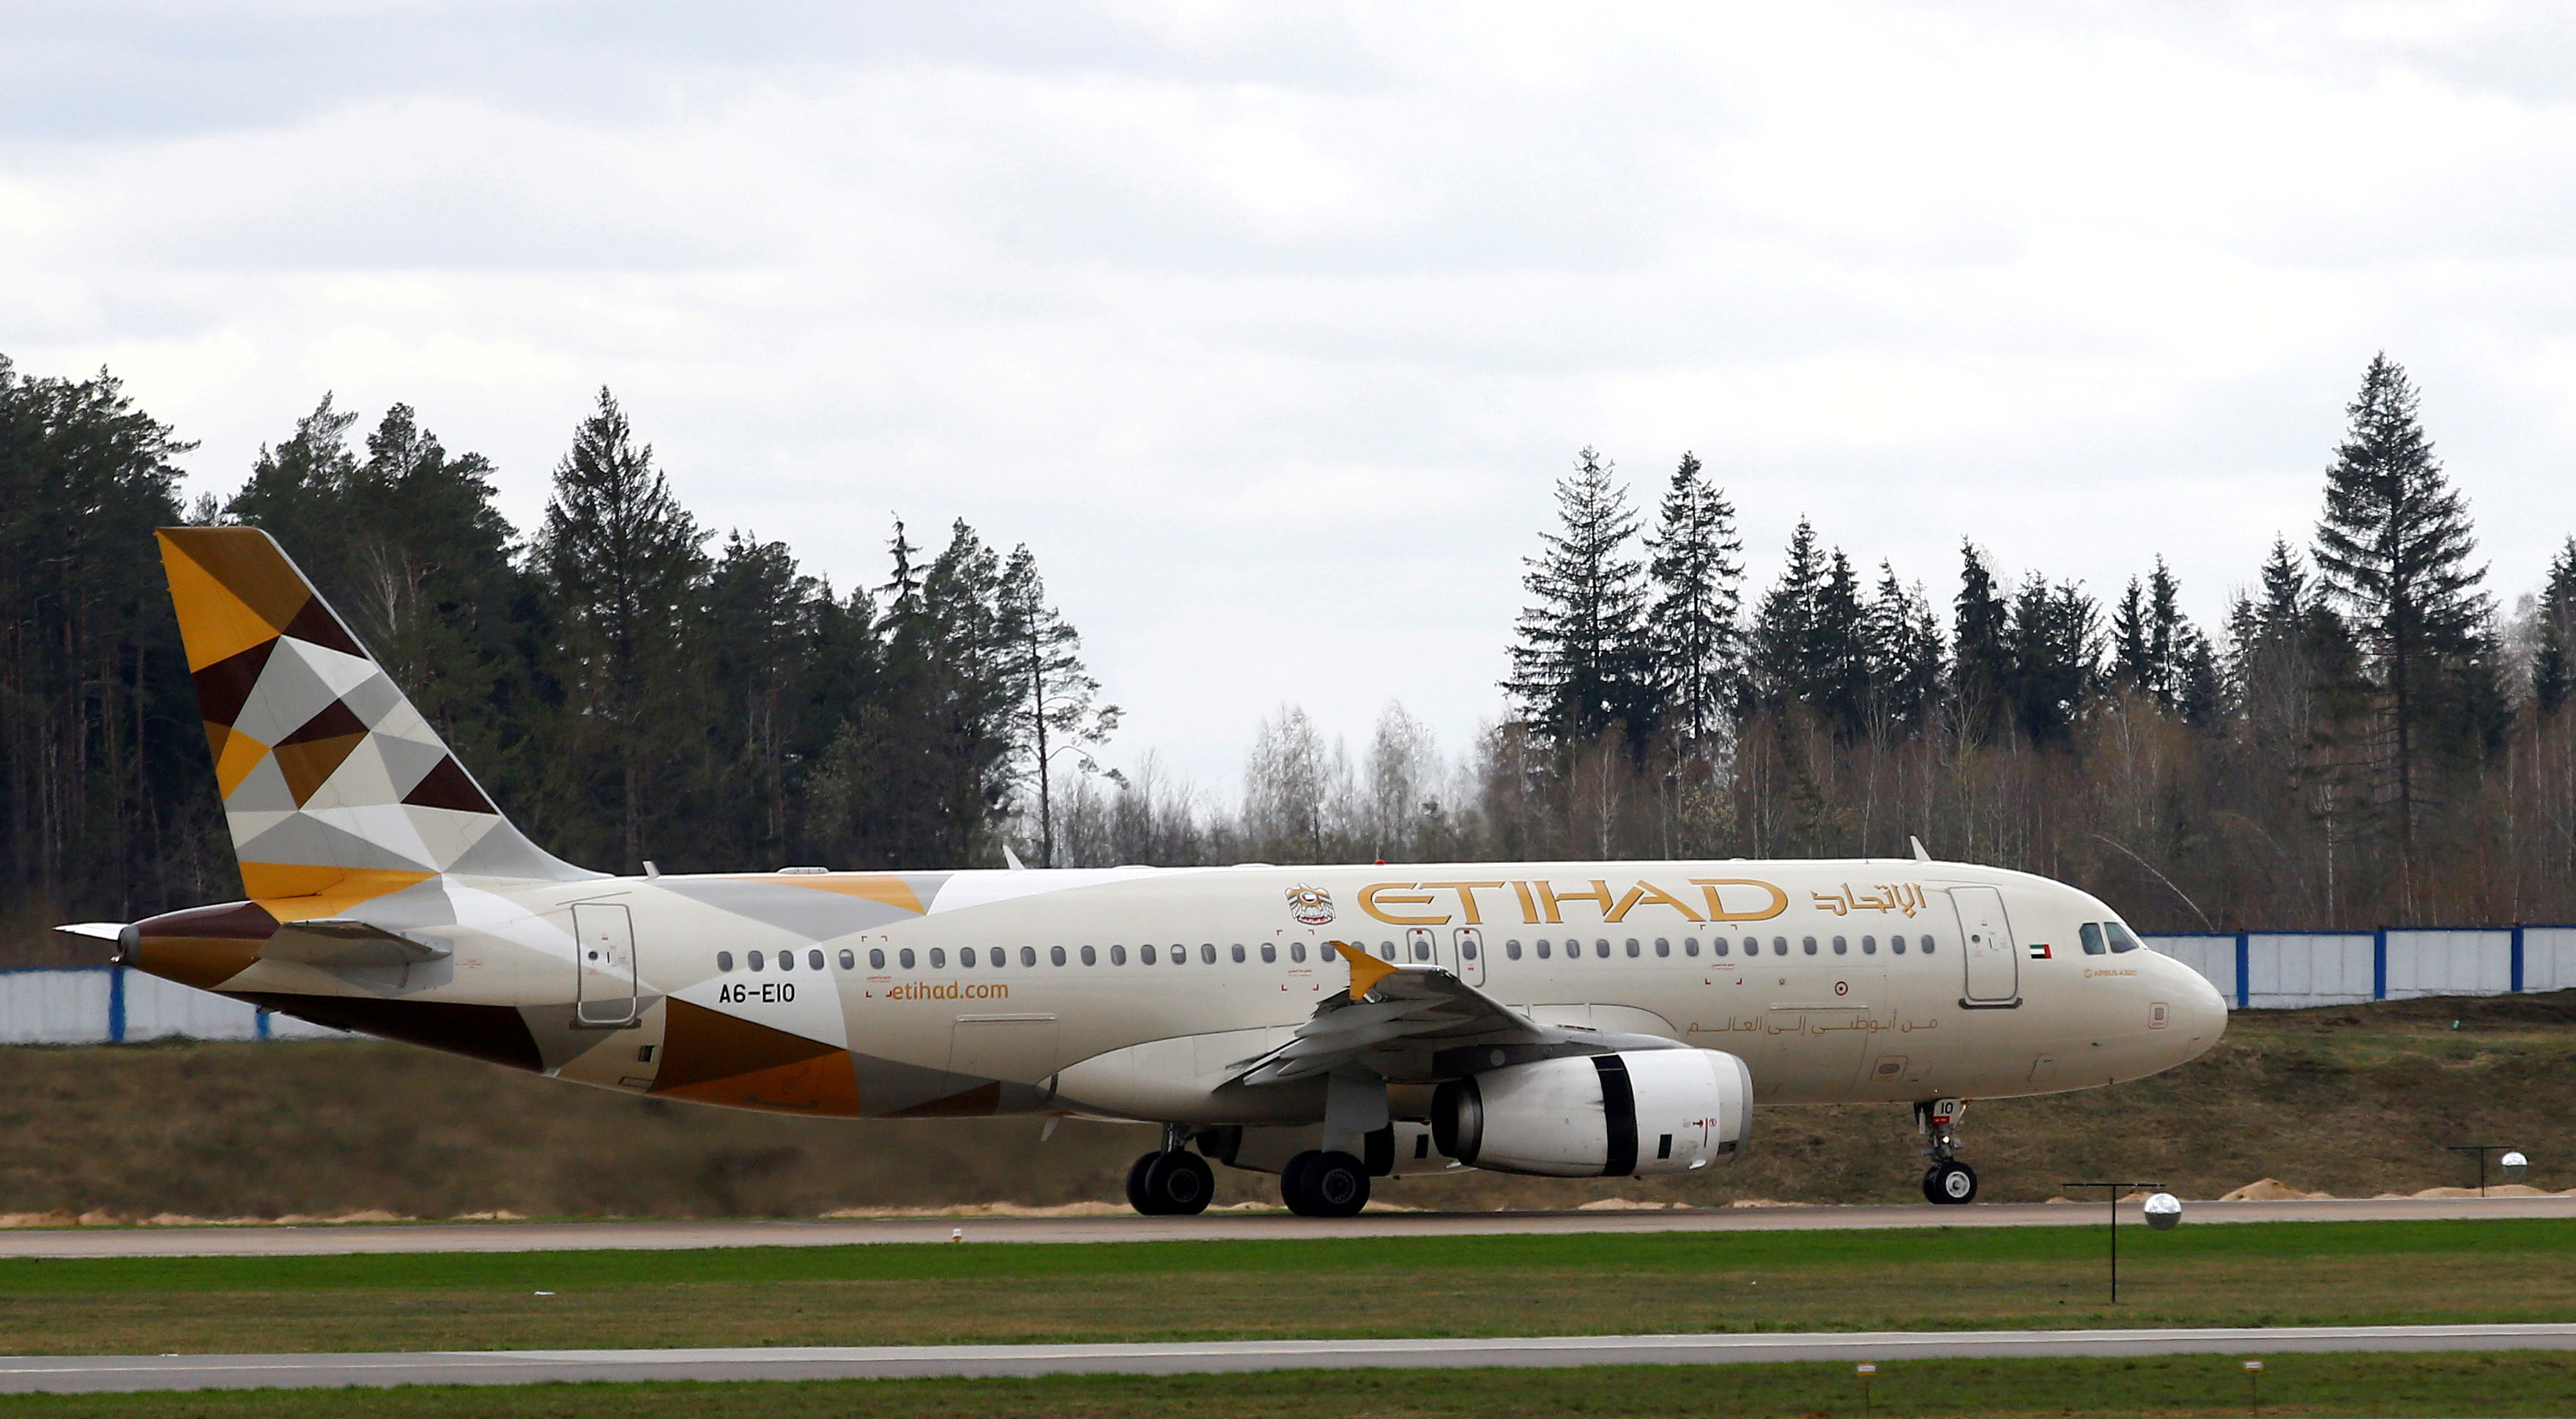 Etihad Airways Airbus A320-200 plane is seen at the National Airport Minsk, Belarus. (Reuters Photo)